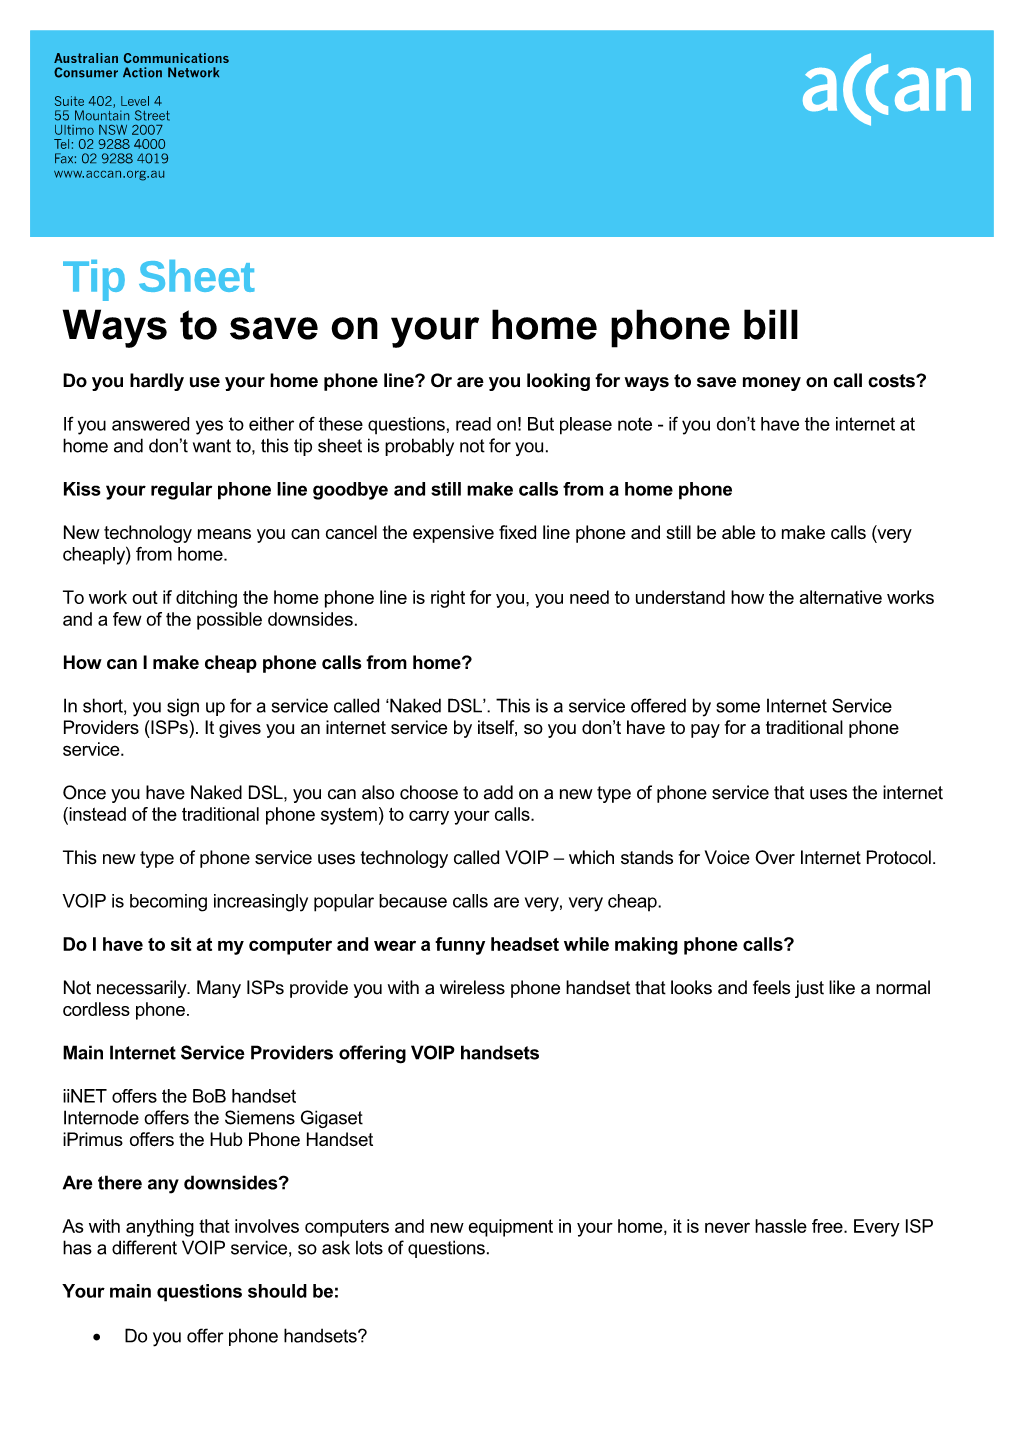 Ways to Save on Your Home Phone Bill